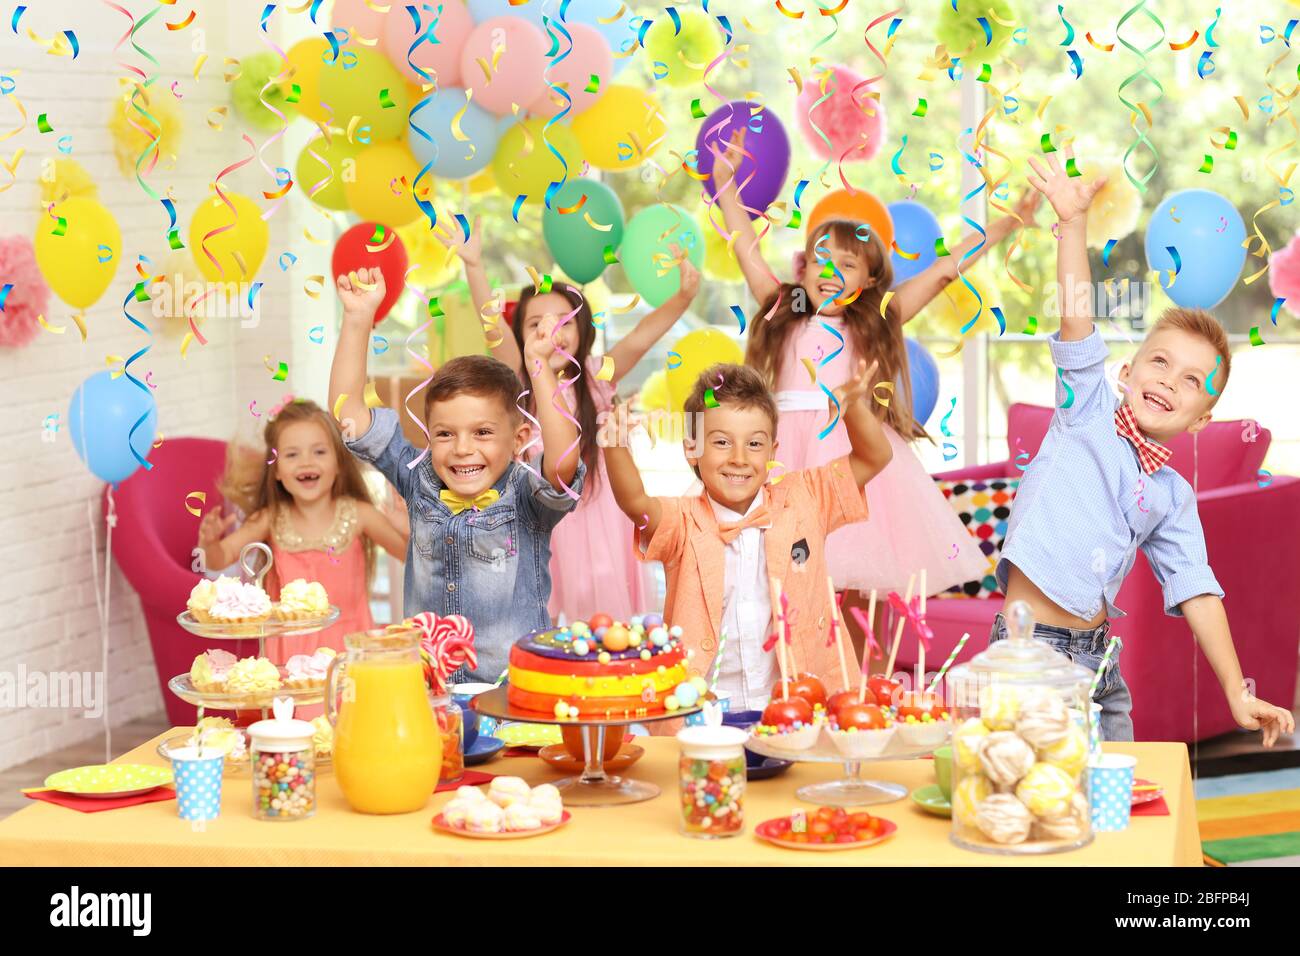 Children's funny birthday party in decorated room Stock Photo - Alamy